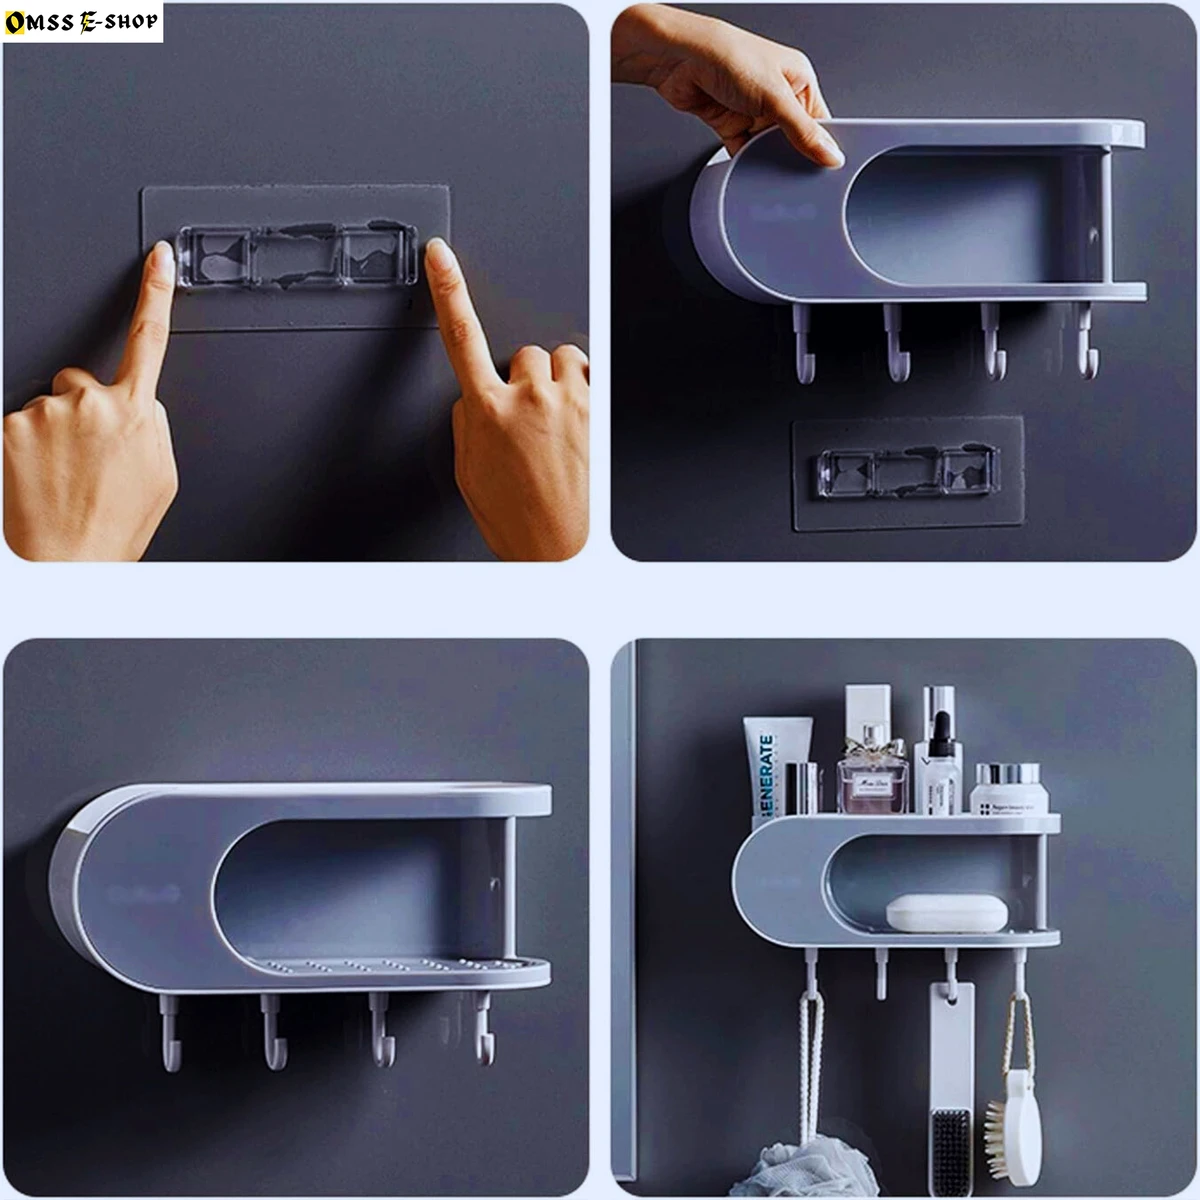 Double Layer Soap Box Shelf Free Perforation Creative Drain Toilet Suction Cup Wall-Mounted Bathroom Soap Dish